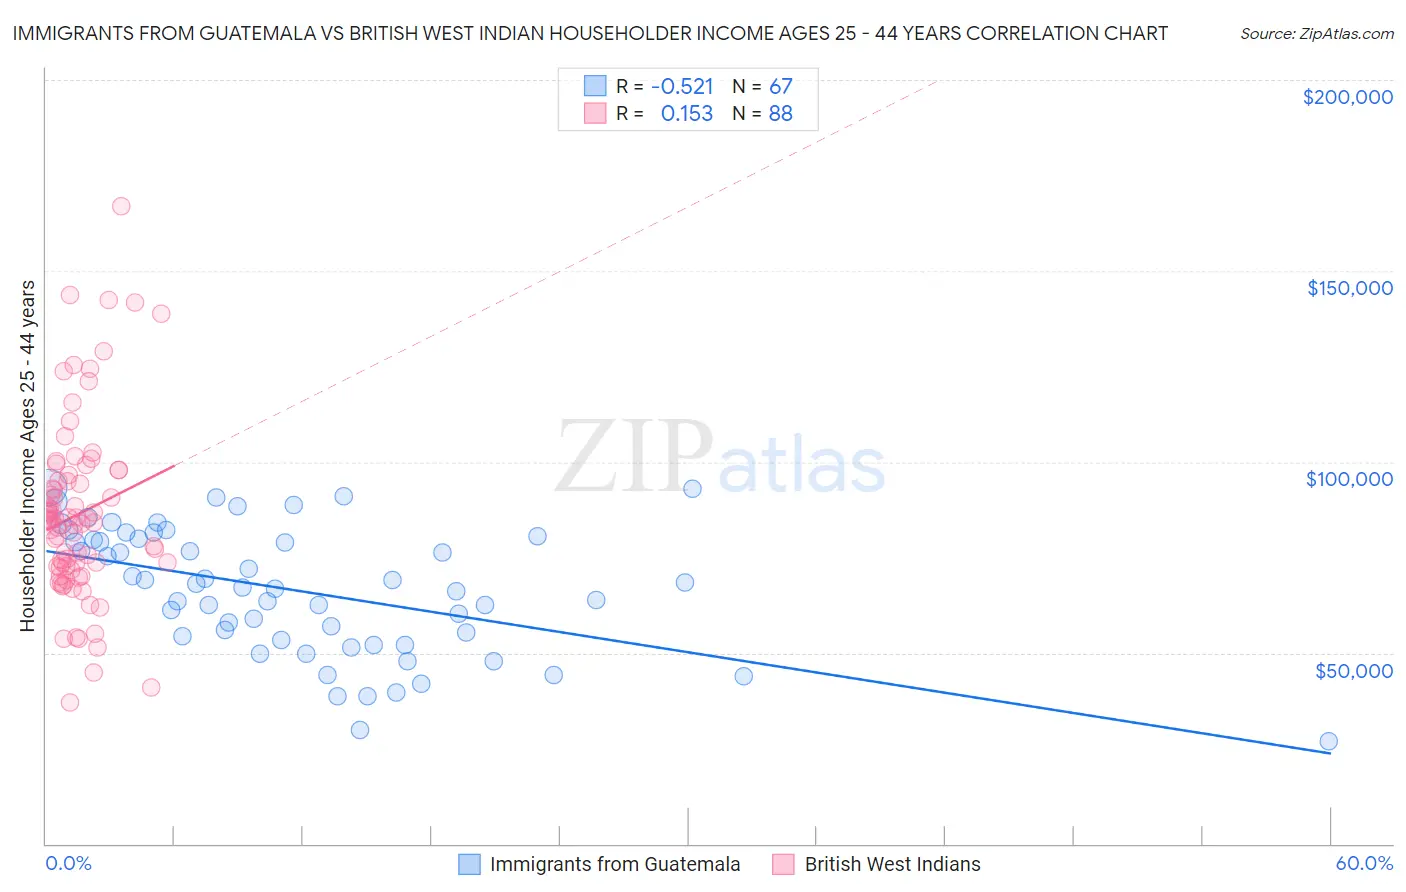 Immigrants from Guatemala vs British West Indian Householder Income Ages 25 - 44 years